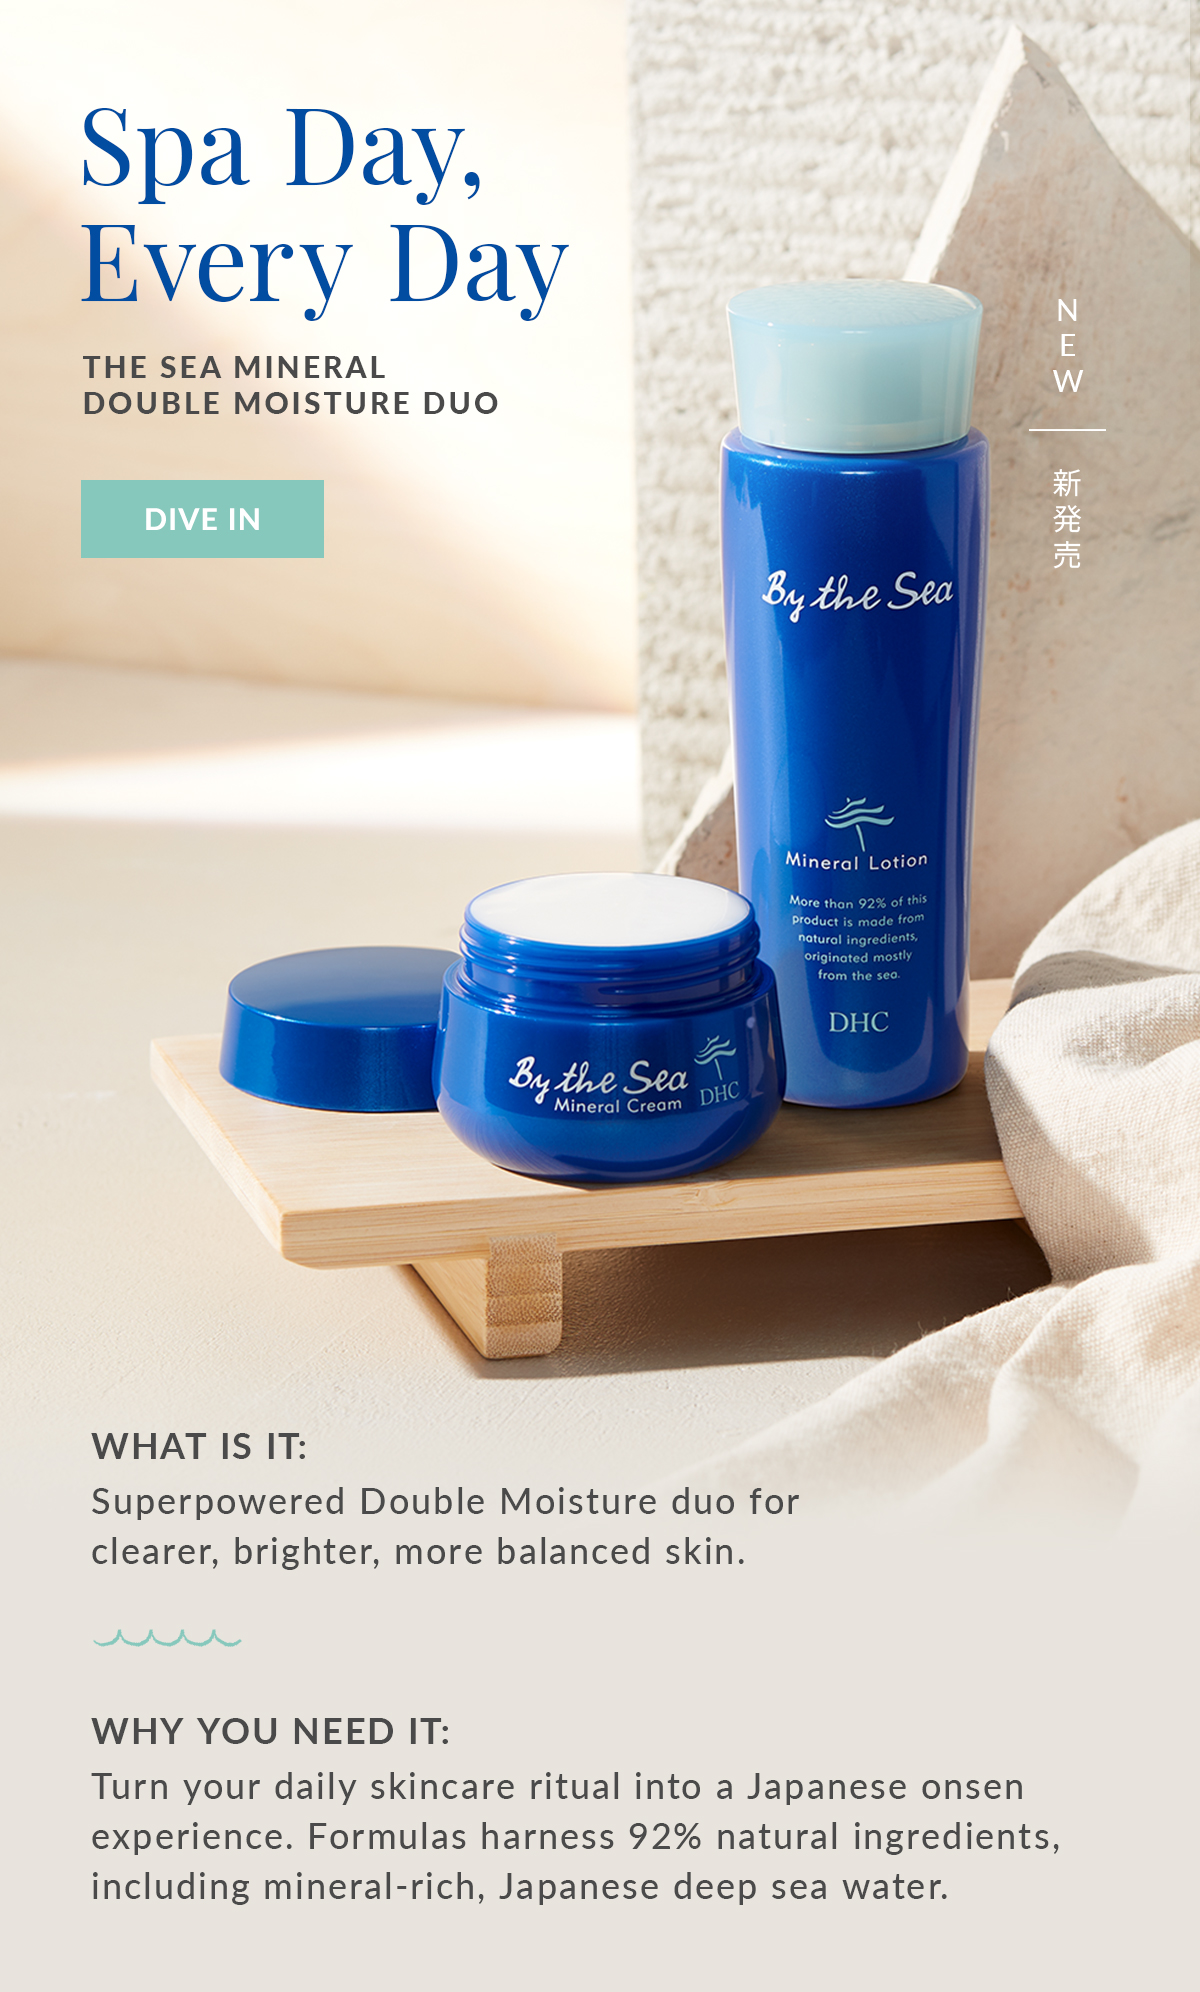 The Sea Mineral Double Moisture Duo - Dive In 